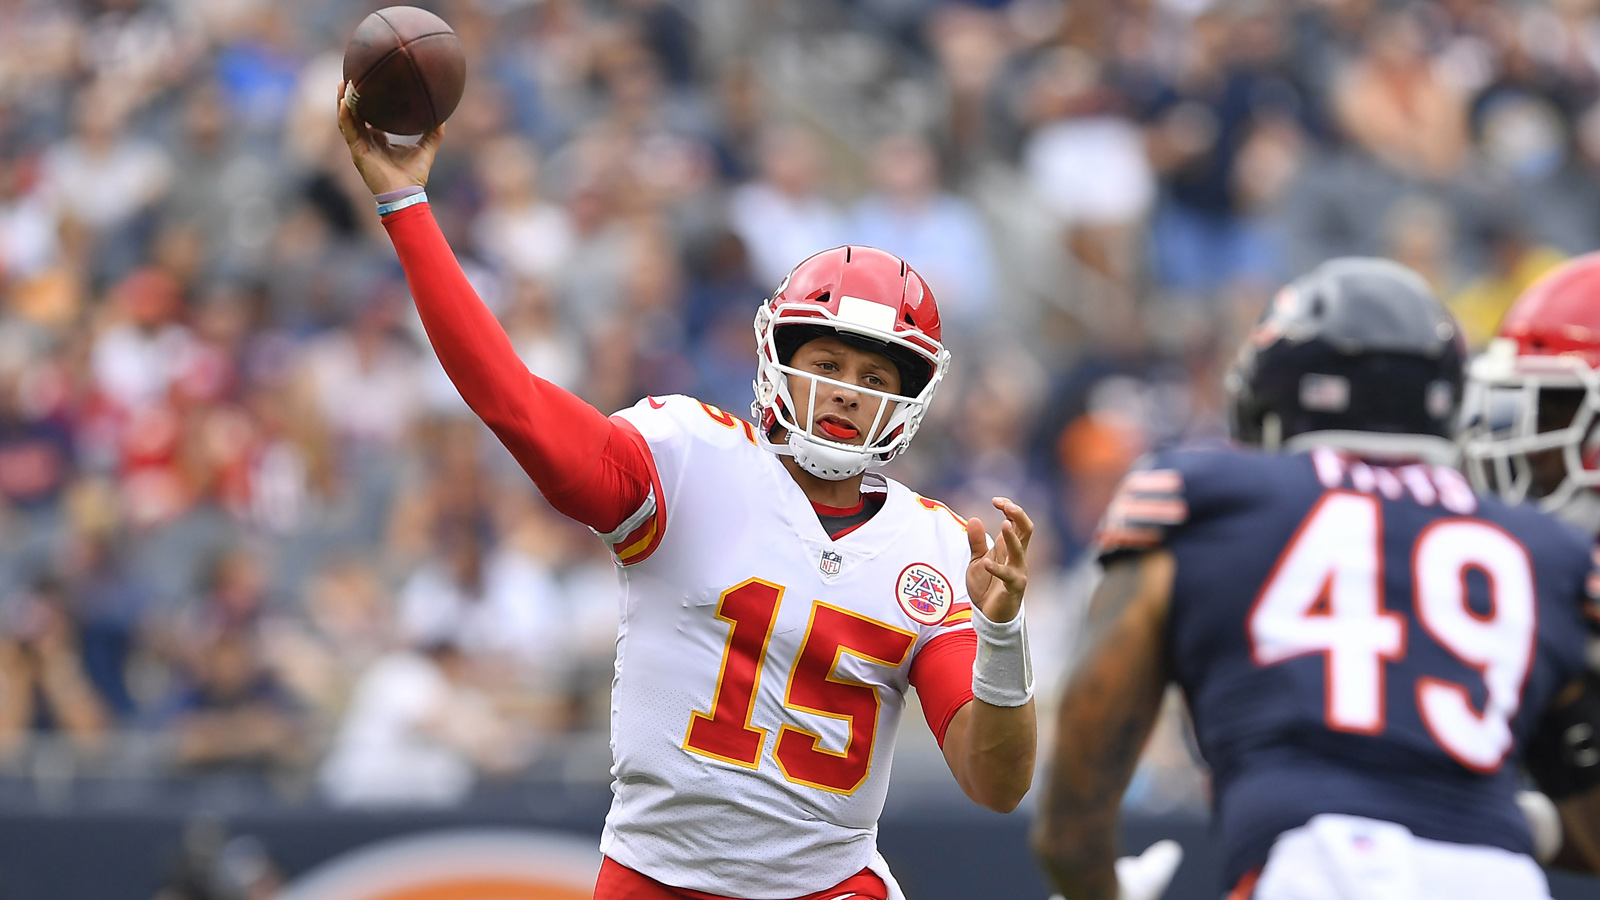 Starting offense shows inconsistency as Chiefs fall 27-20 to Bears